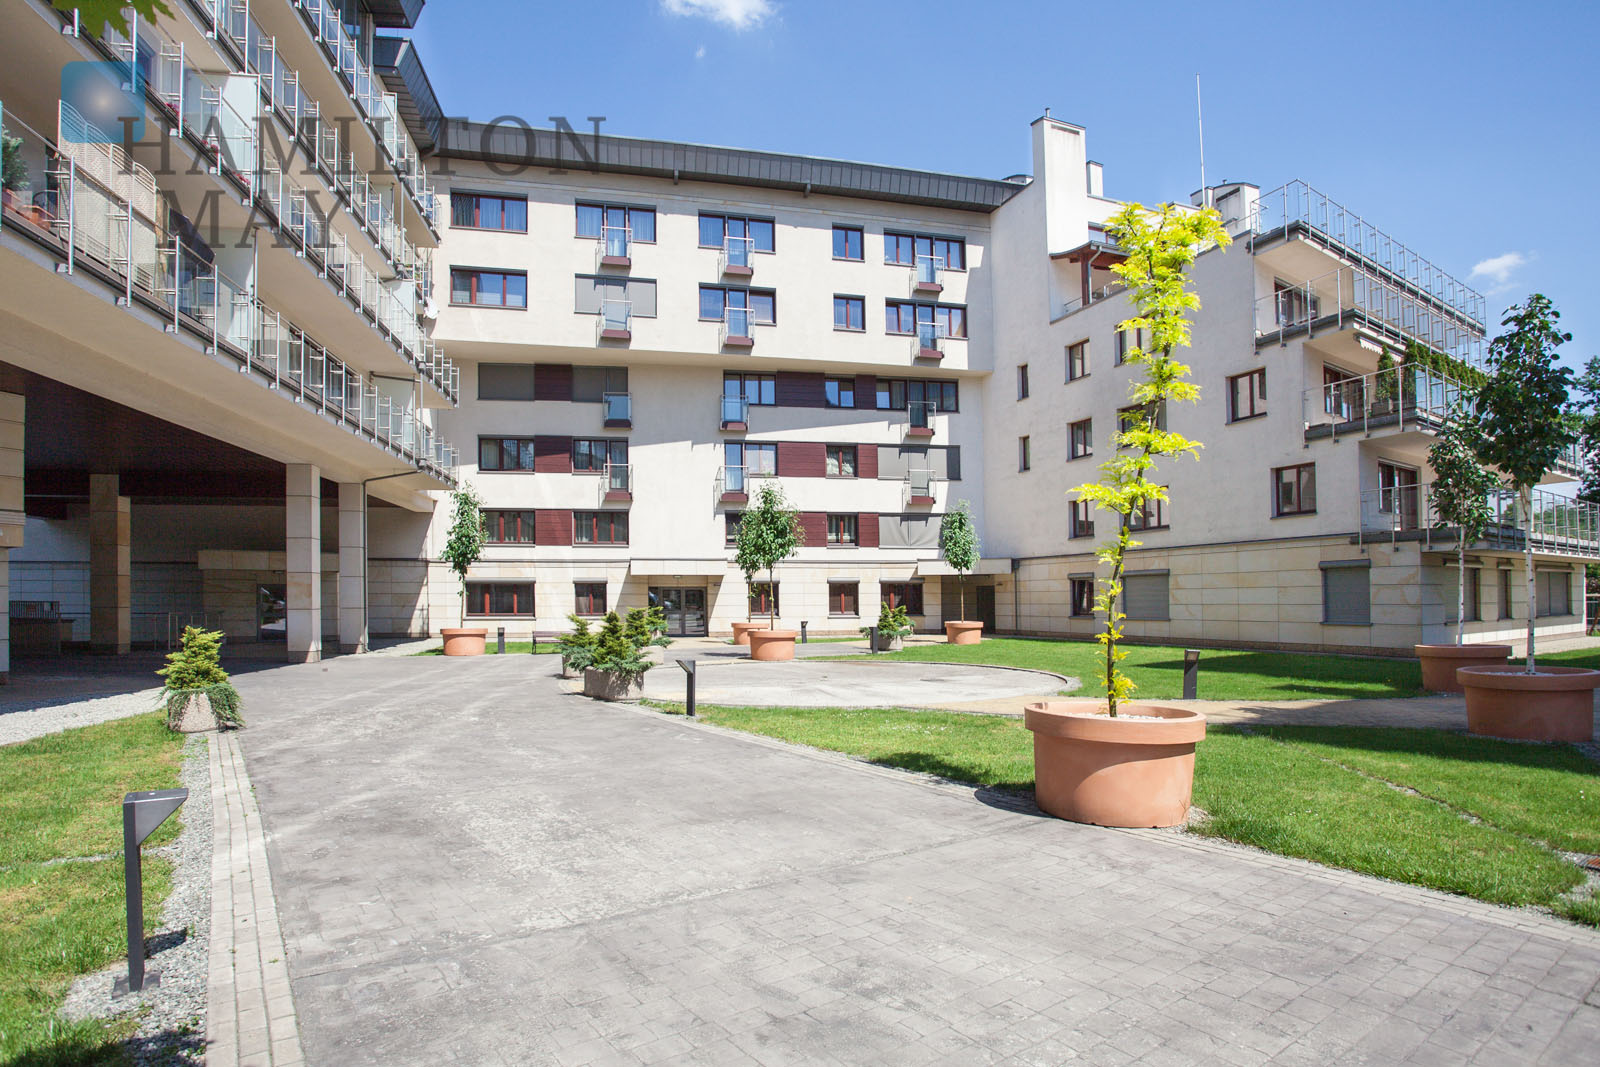 Apartments for rent and sale in a superbly located development - 'Ludwinów Apartments'